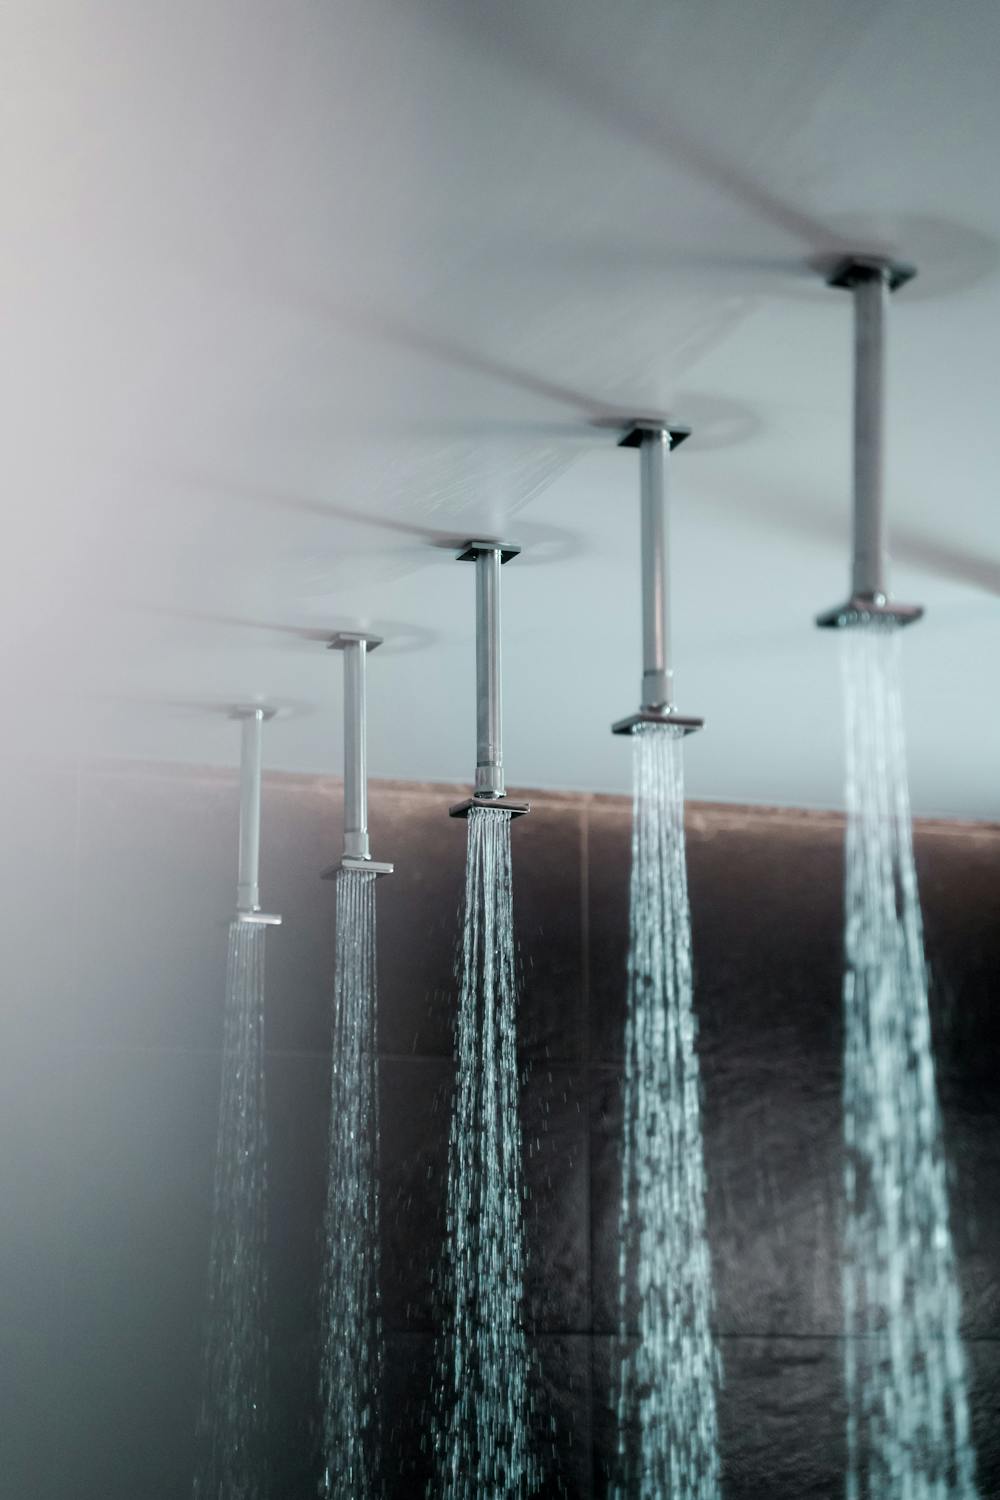 Water pouring from Shower Faucets on a Ceiling